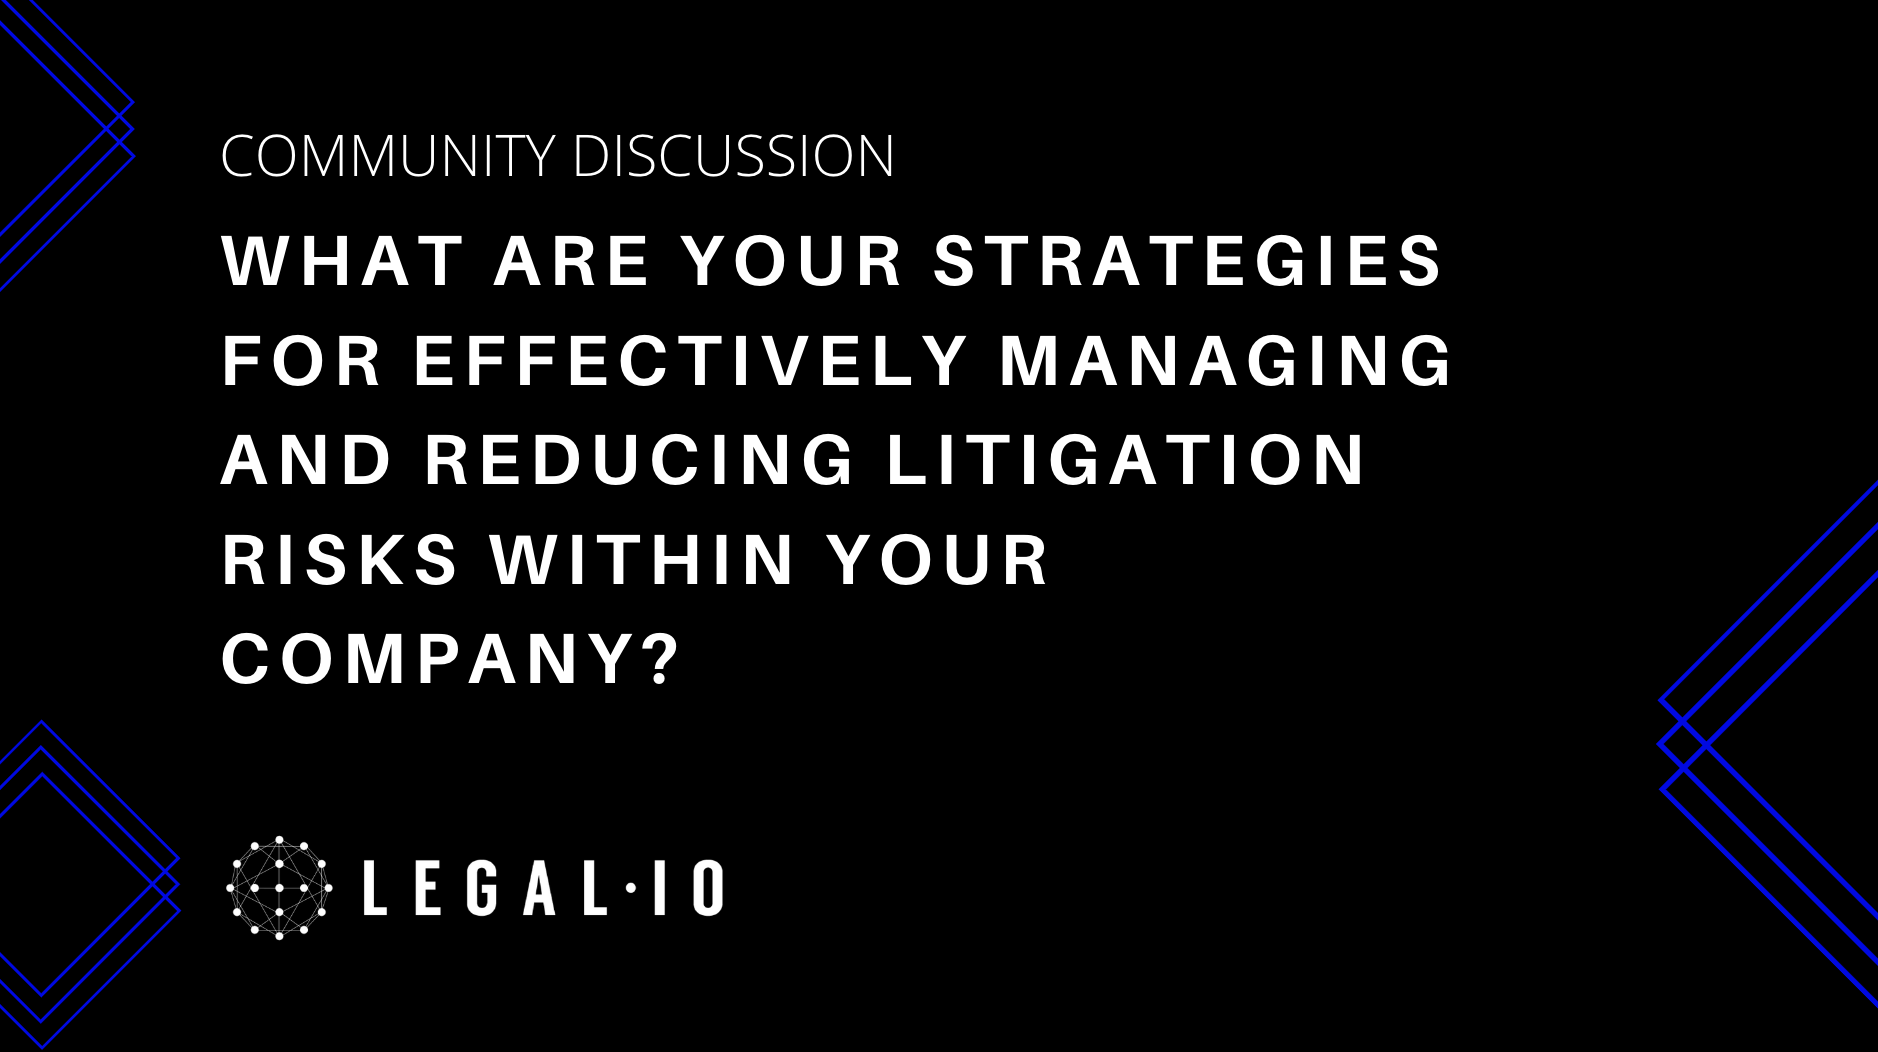 Community Discussion: What are your strategies for effectively managing and reducing litigation risks within your company?